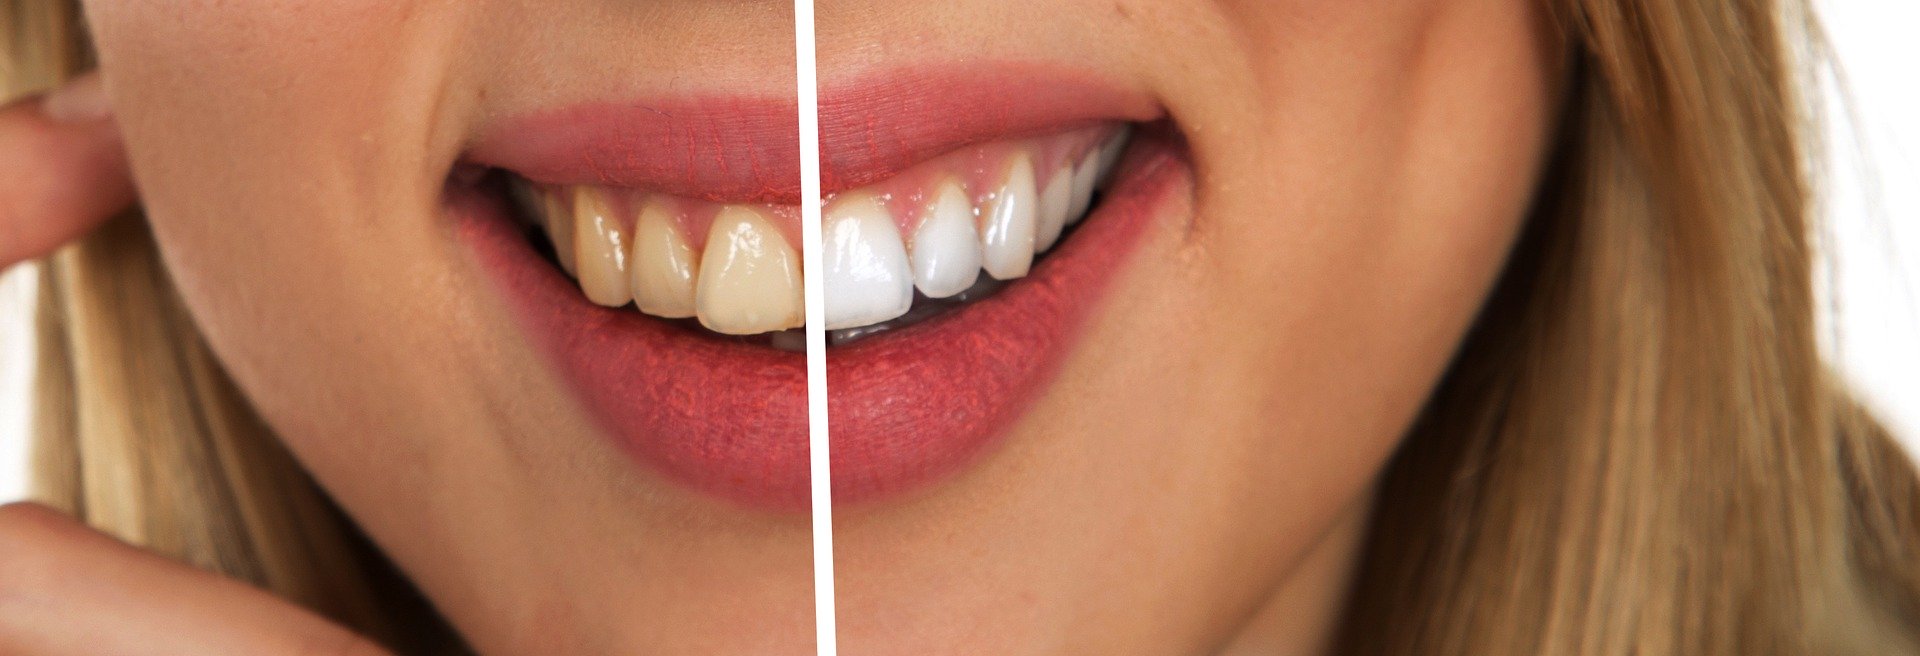 Simple Ways to Naturally Whiten Your Teeth - The Blessed Seed